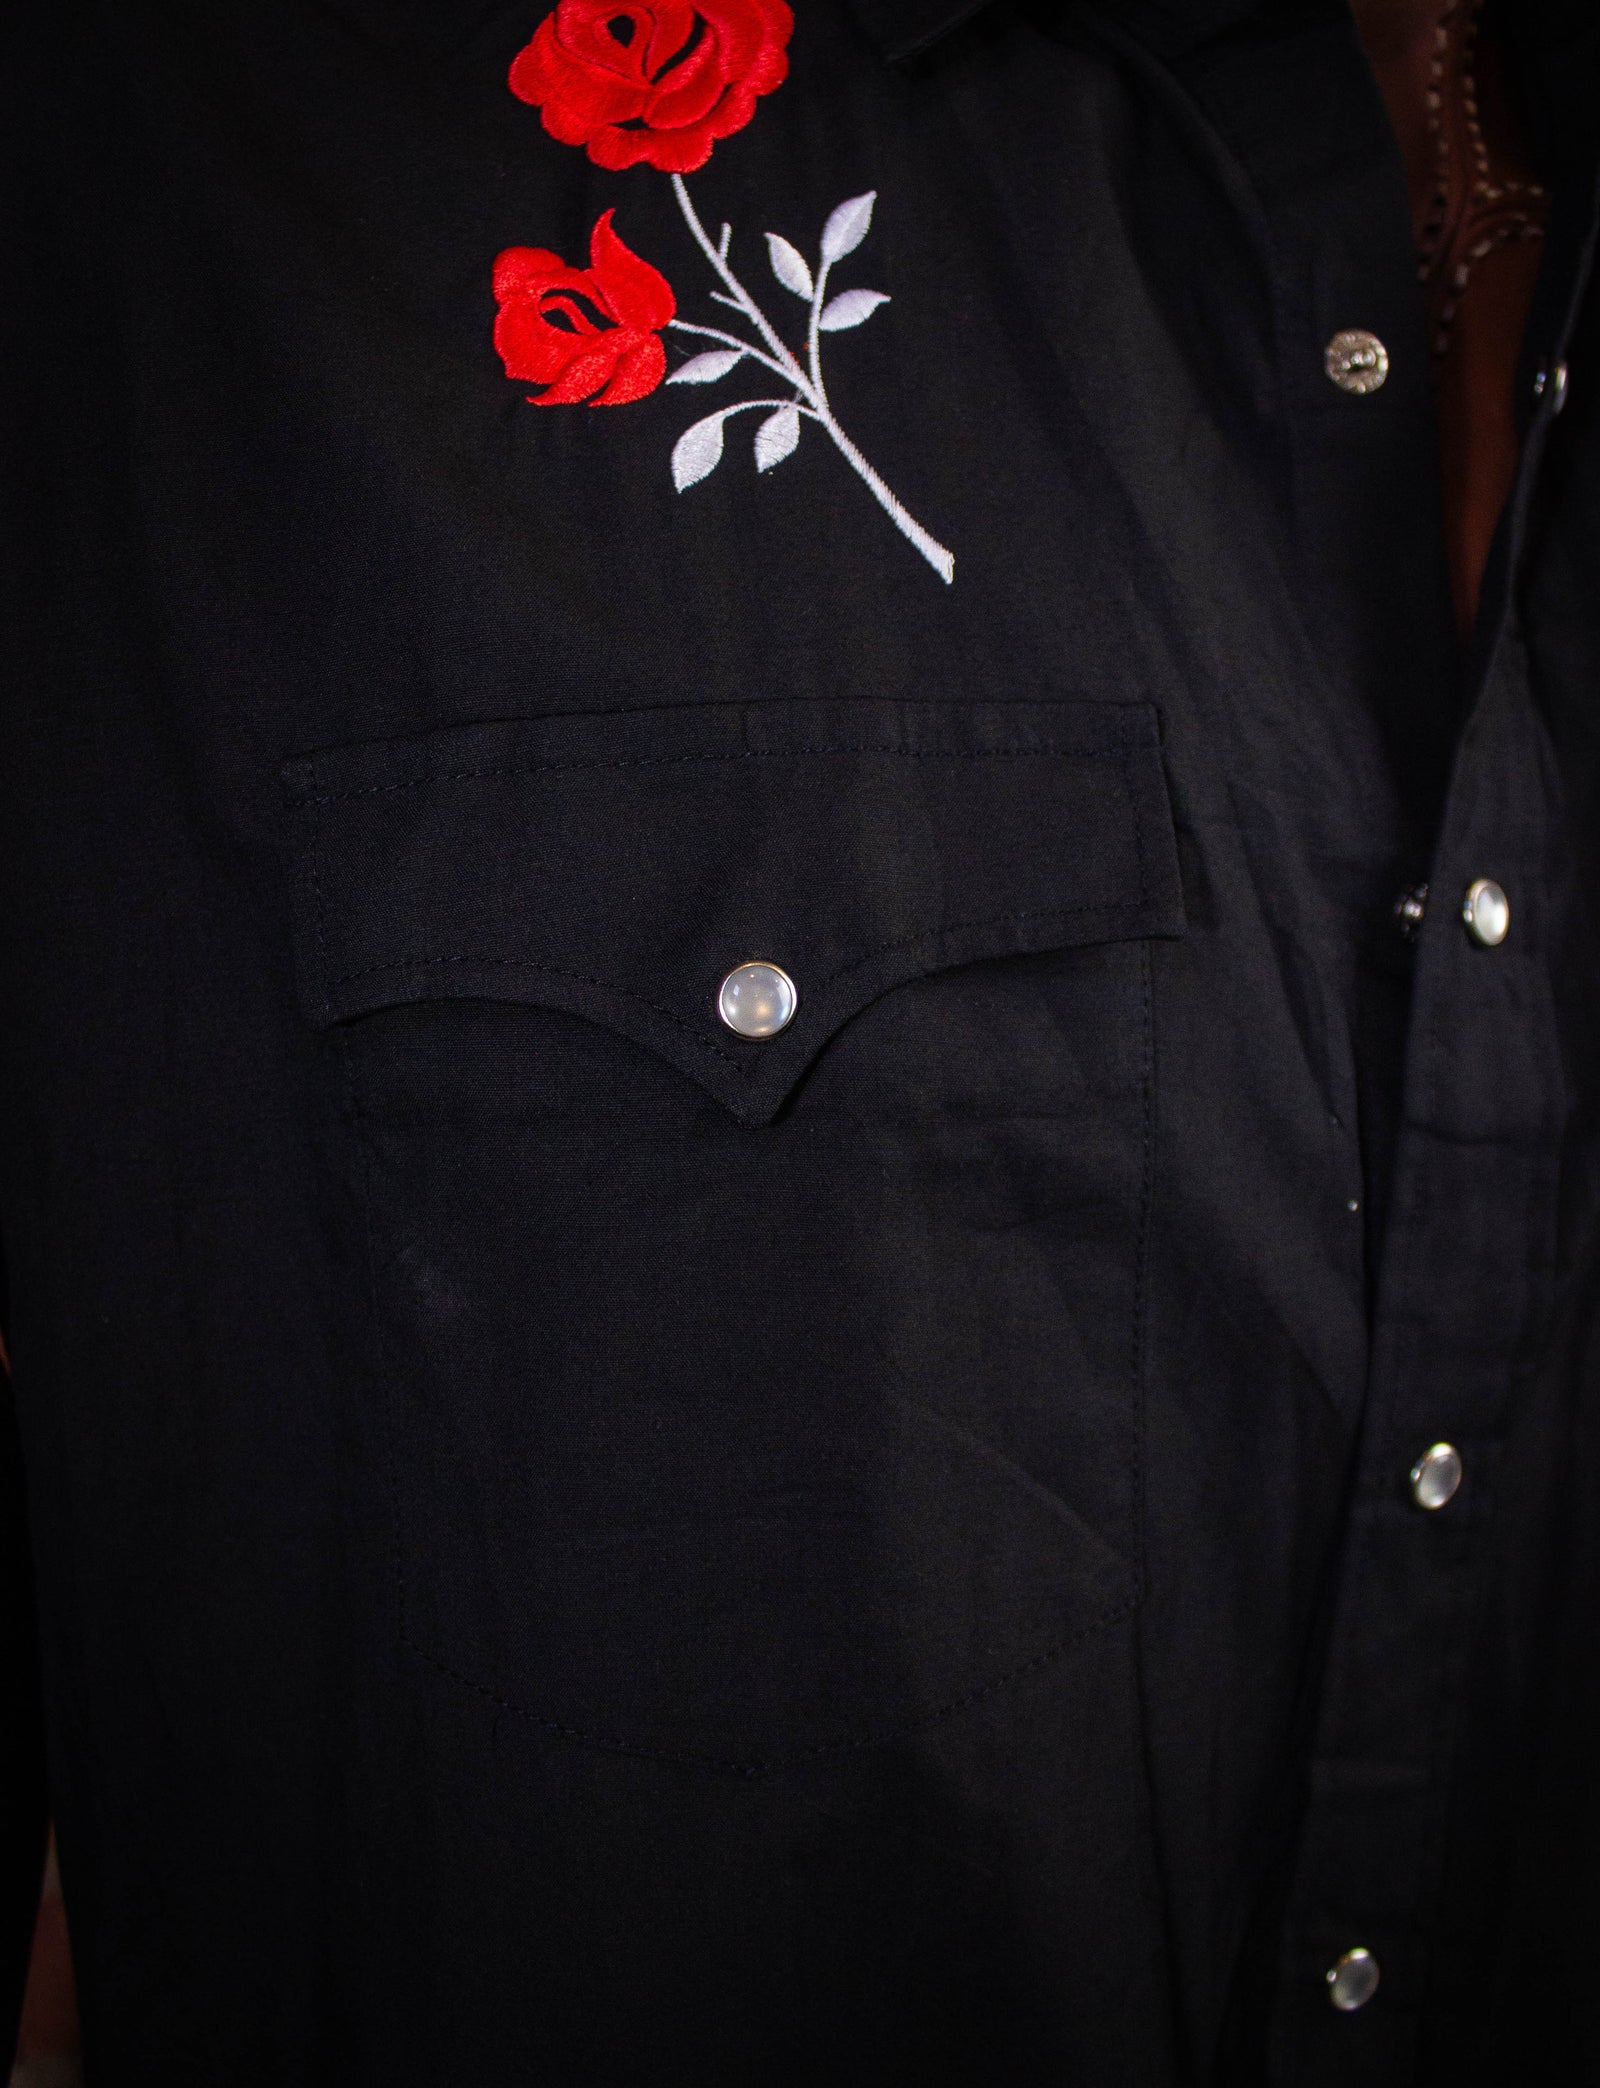 Vintage High Noon Rose Embroidery Pearl Snap Western Shirt Black XL